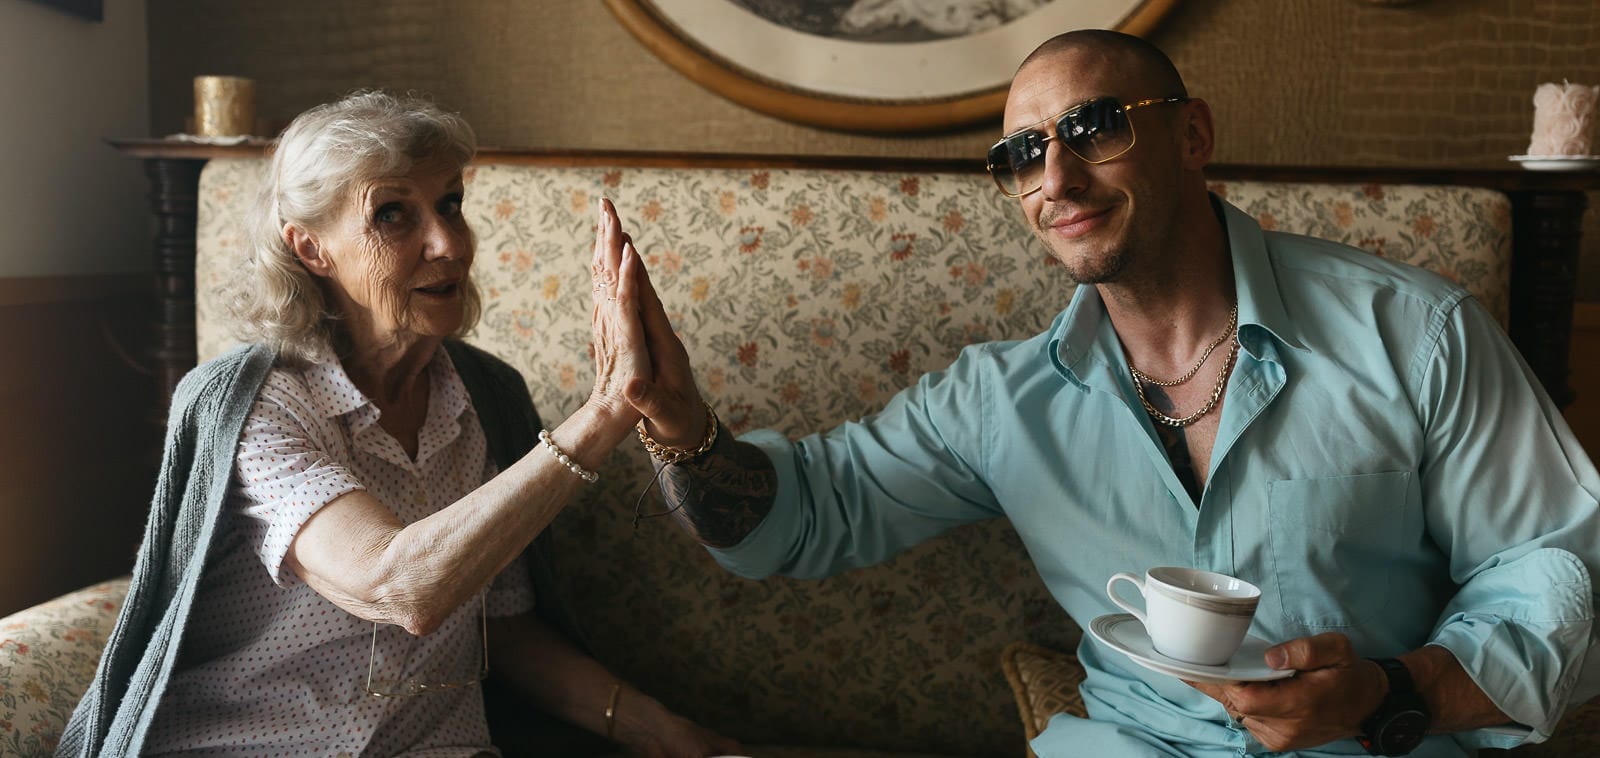 Squareme Loka coffee TV ad - Slovenian celebrity Denis Porčič - Chorchyp sitting on a vintage couch holding a cup of coffee and doing a high five with actress playing a cool grandma